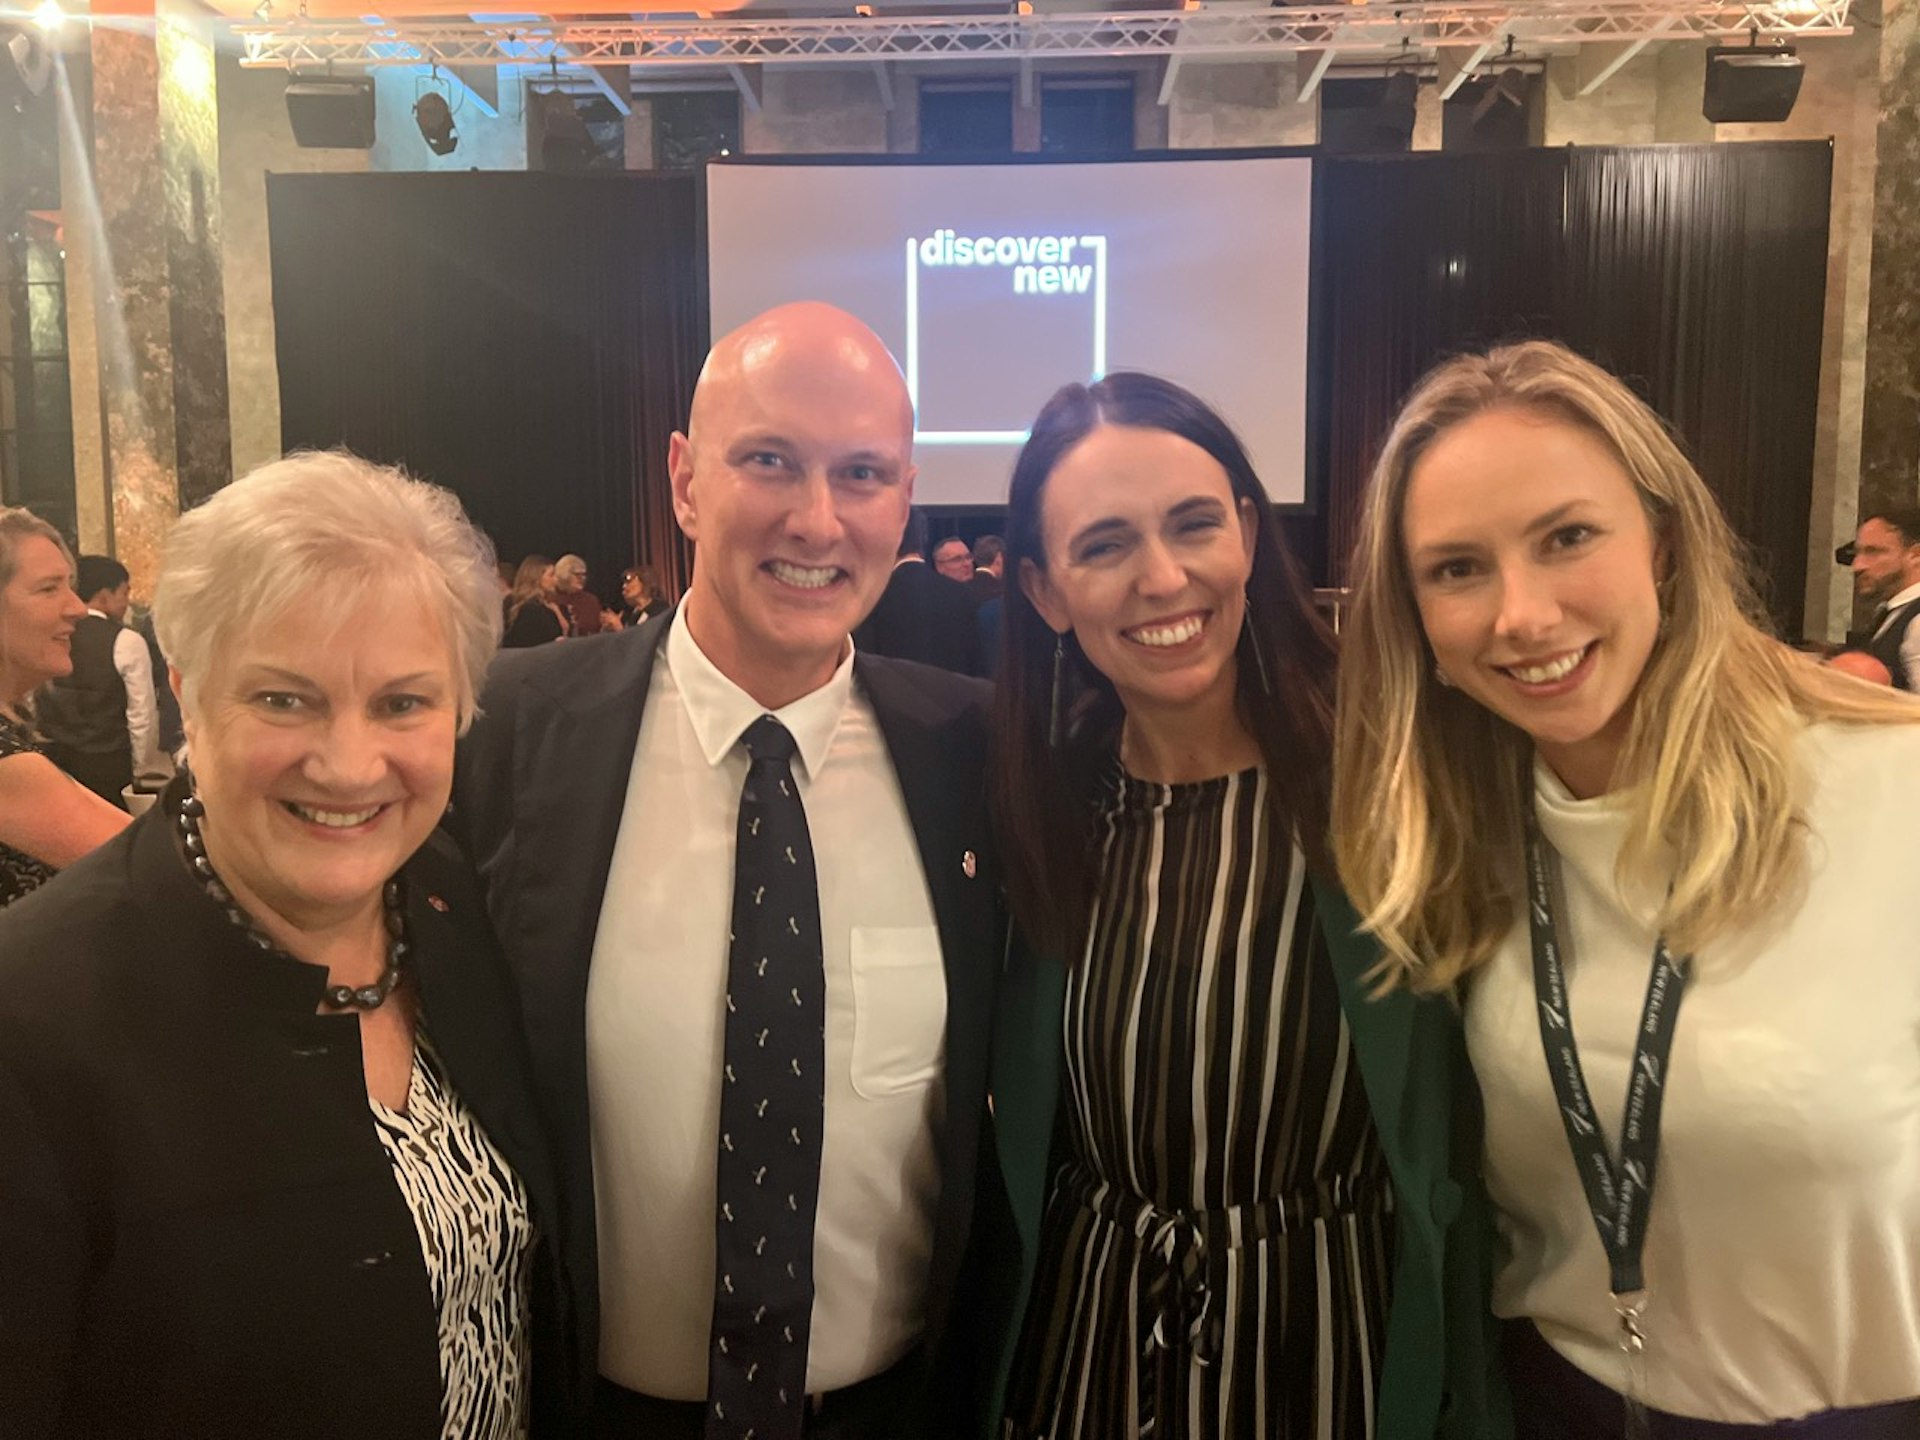 A photo of four people all smiling into the camera. From left it's Annette King (High Commissioner of New Zealand to Australia), Brendan Doggett (Country Manager of Sharesies Australia), Jacinda Ardern (Prime Minister of New Zealand), and Brooke Roberts (co-founder and co-CEO of Sharesies). 